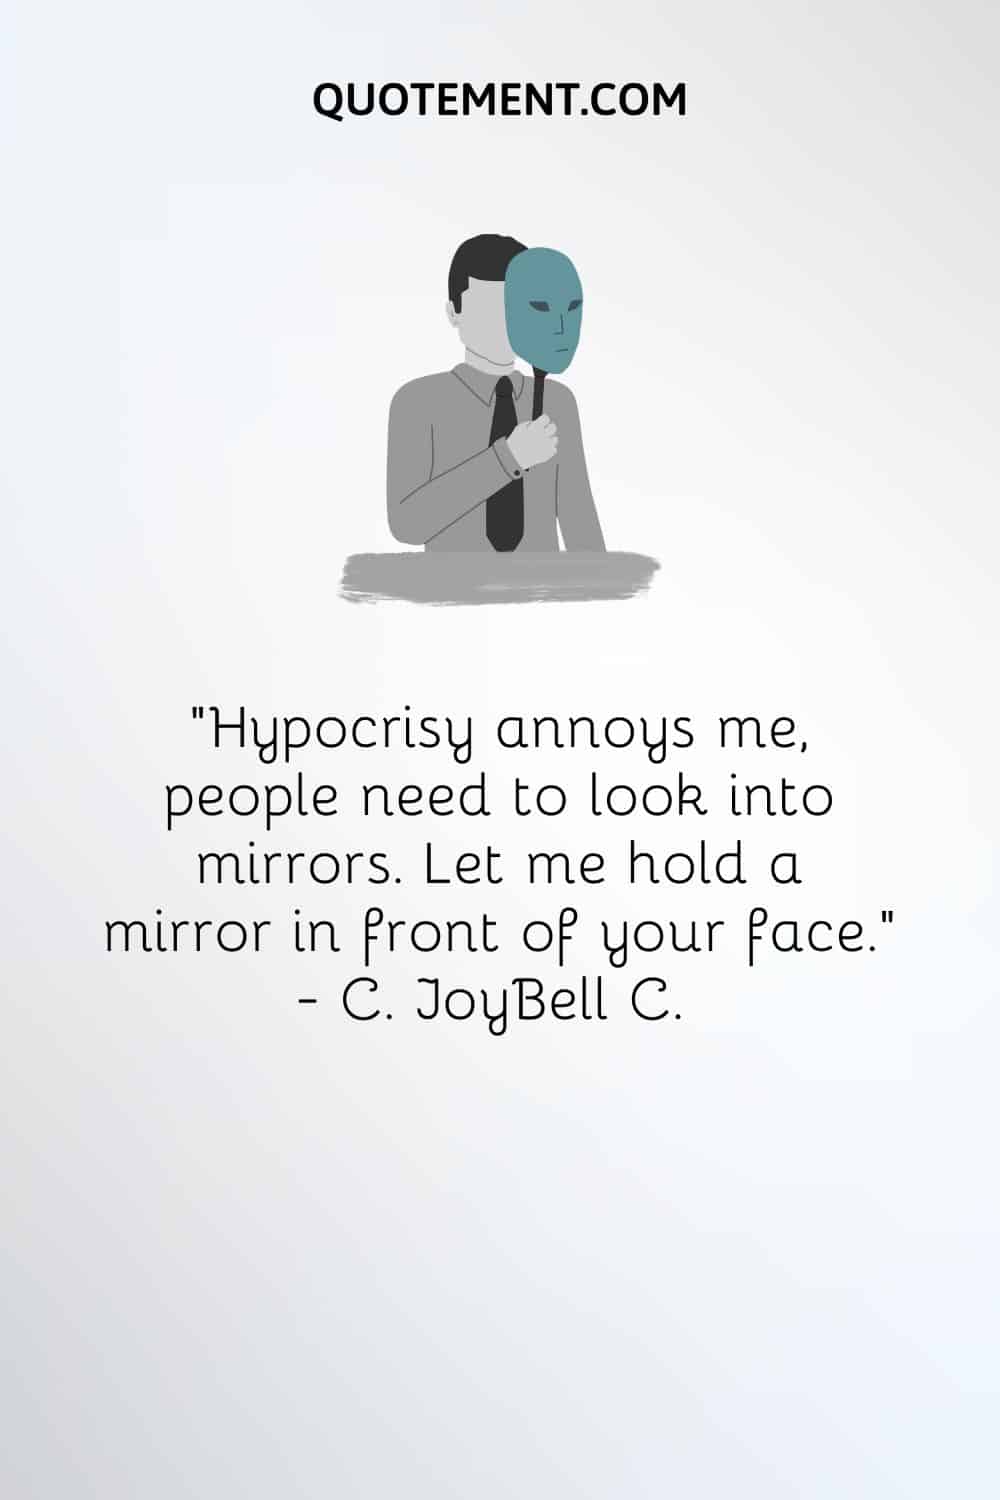 “Hypocrisy annoys me, people need to look into mirrors. Let me hold a mirror in front of your face.” ― C. JoyBell C.